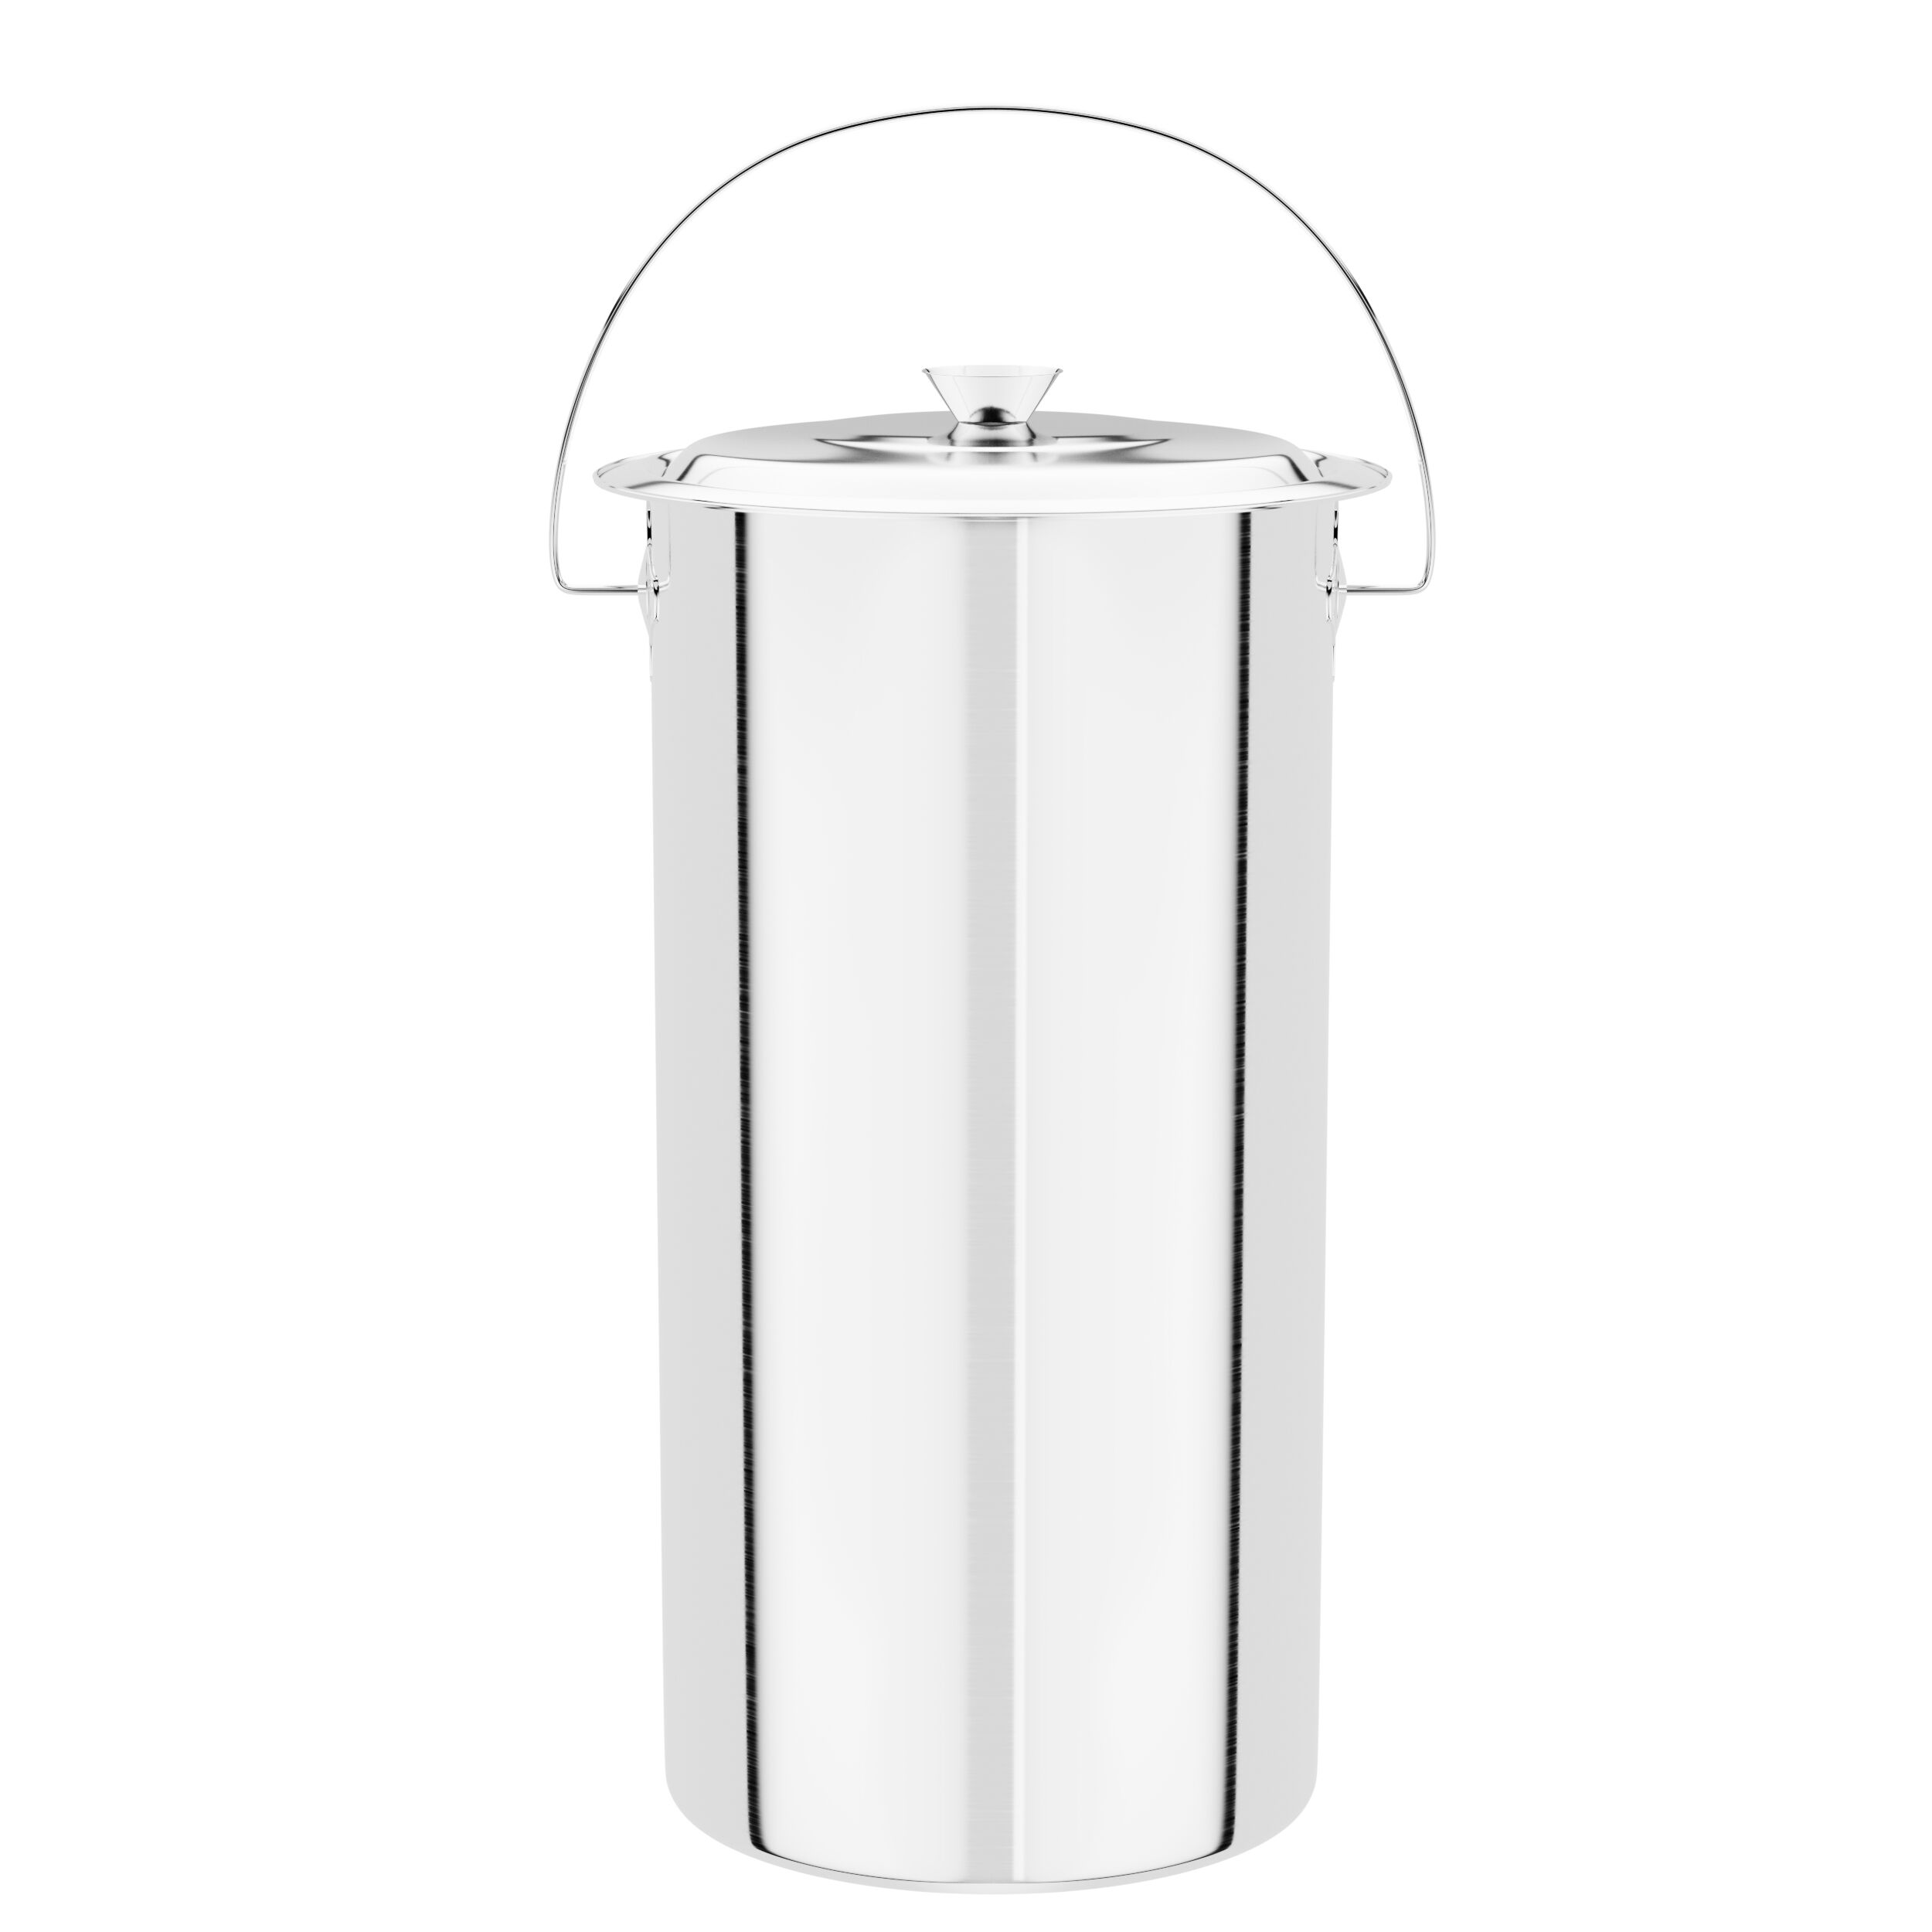 Royal Catering Stainless Steel Champagne Bucket - 12 L RCEE-12L